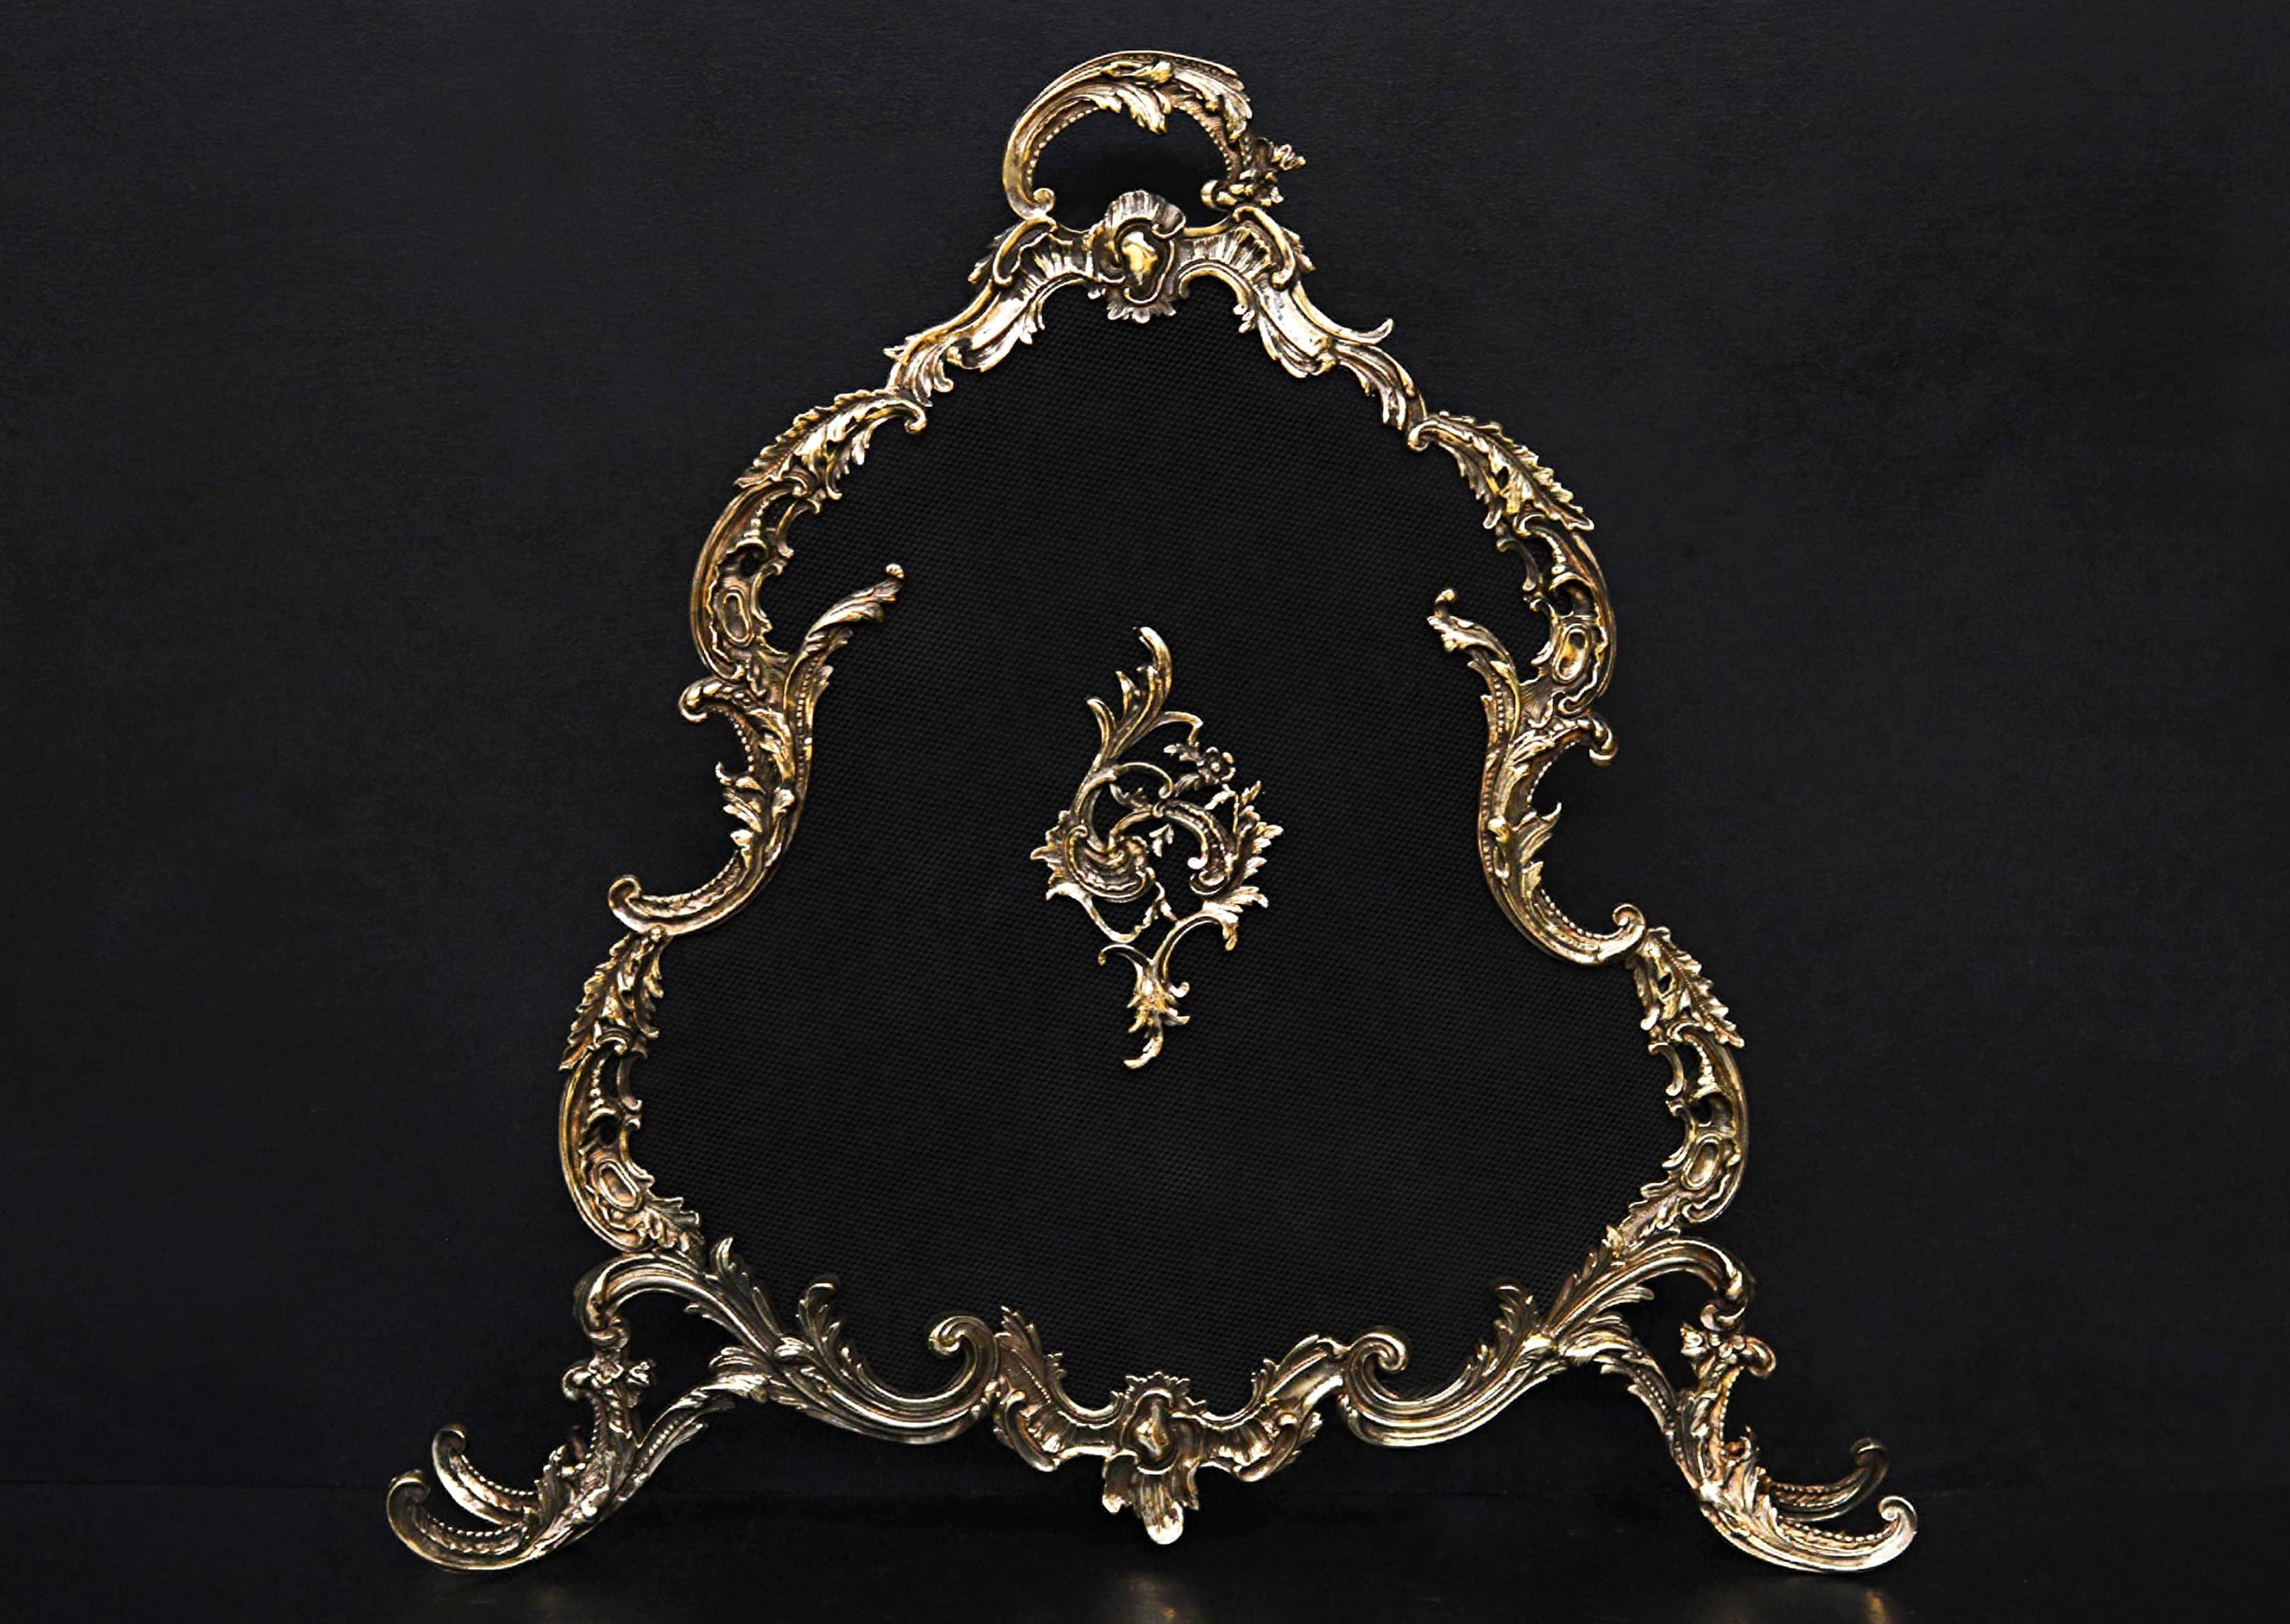 A French Louis XV style brass firescreen with scrolls and leaf form throughout. The mesh embellished with matching decoration. 19th century.

Height: 760 mm 29